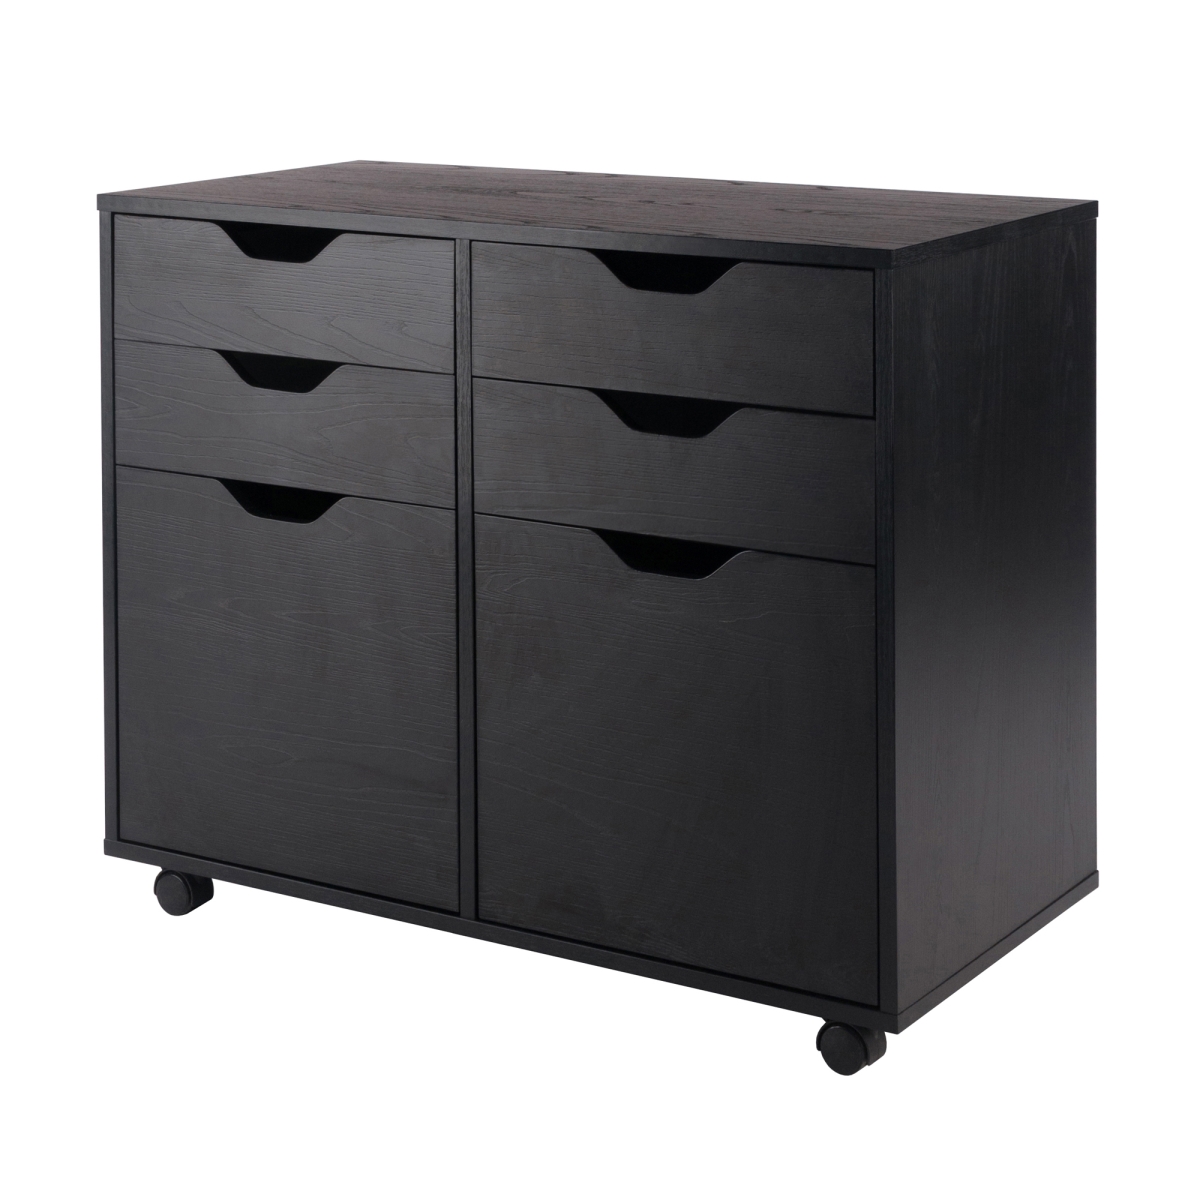 20622 15.1 X 14.7 X 13.7 In. Halifax 2 Section Mobile Storage Cabinet, Black